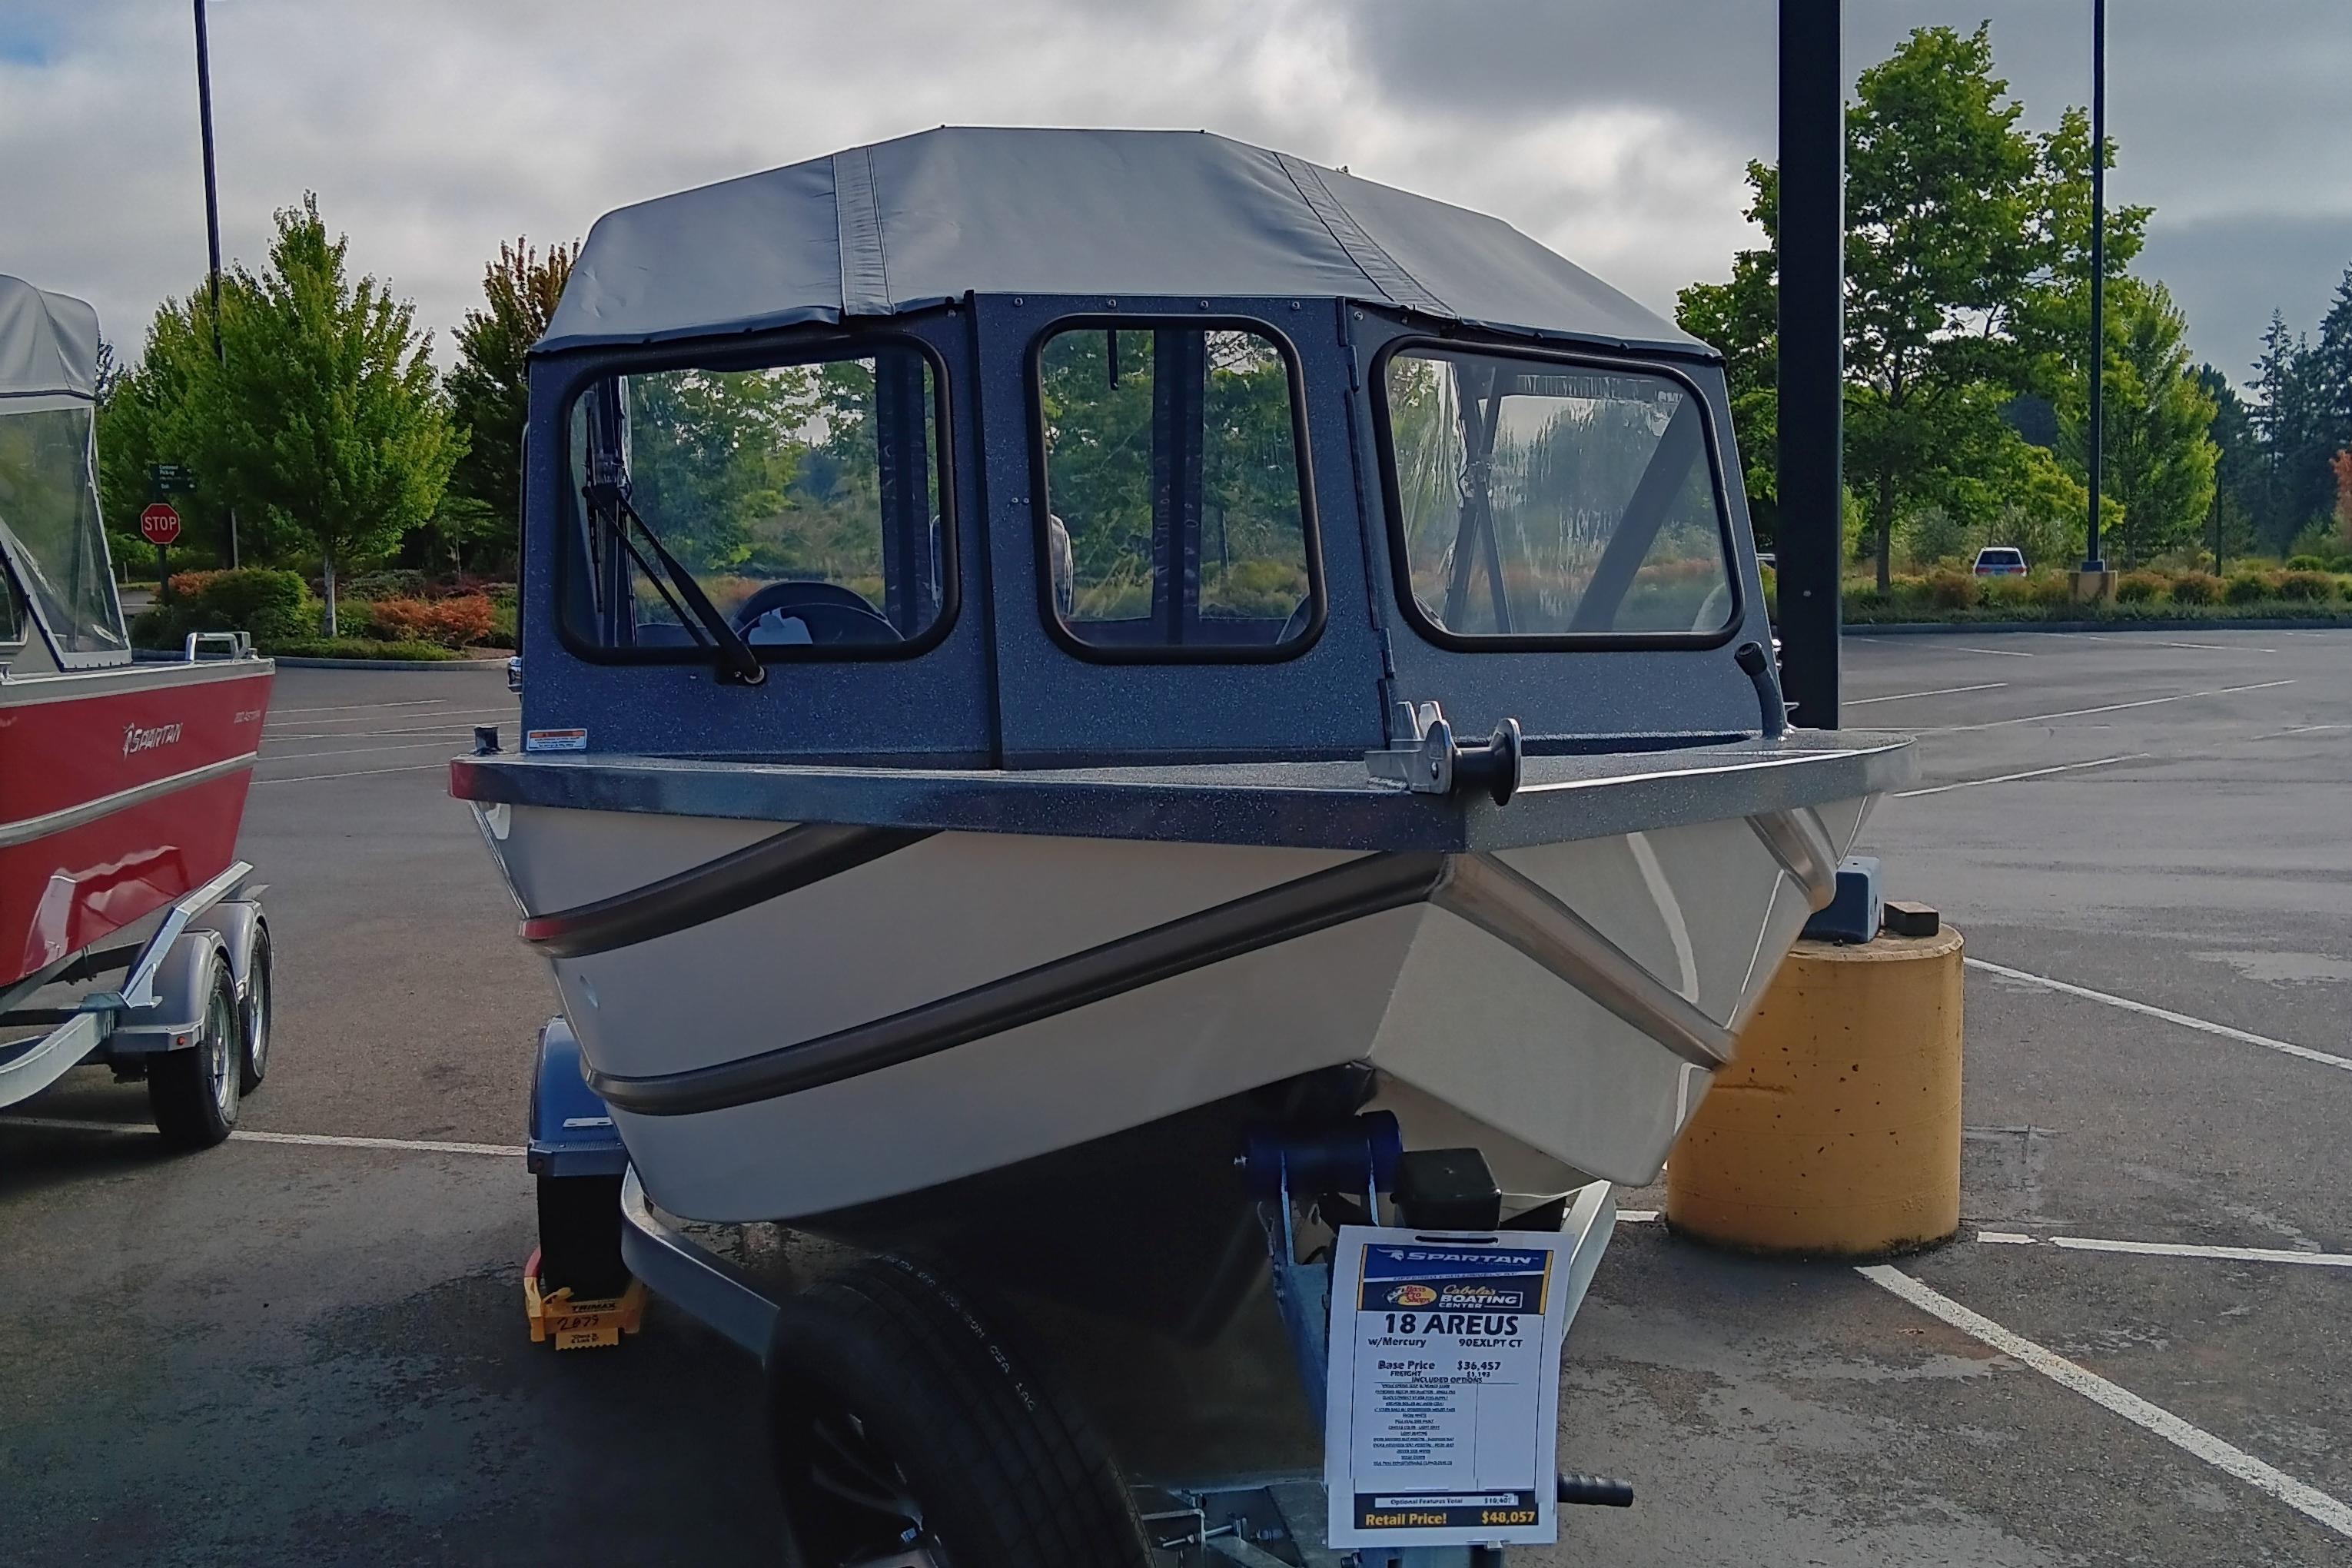 New 2024 Spartan 18 Areus, 98516 Lacey Boat Trader